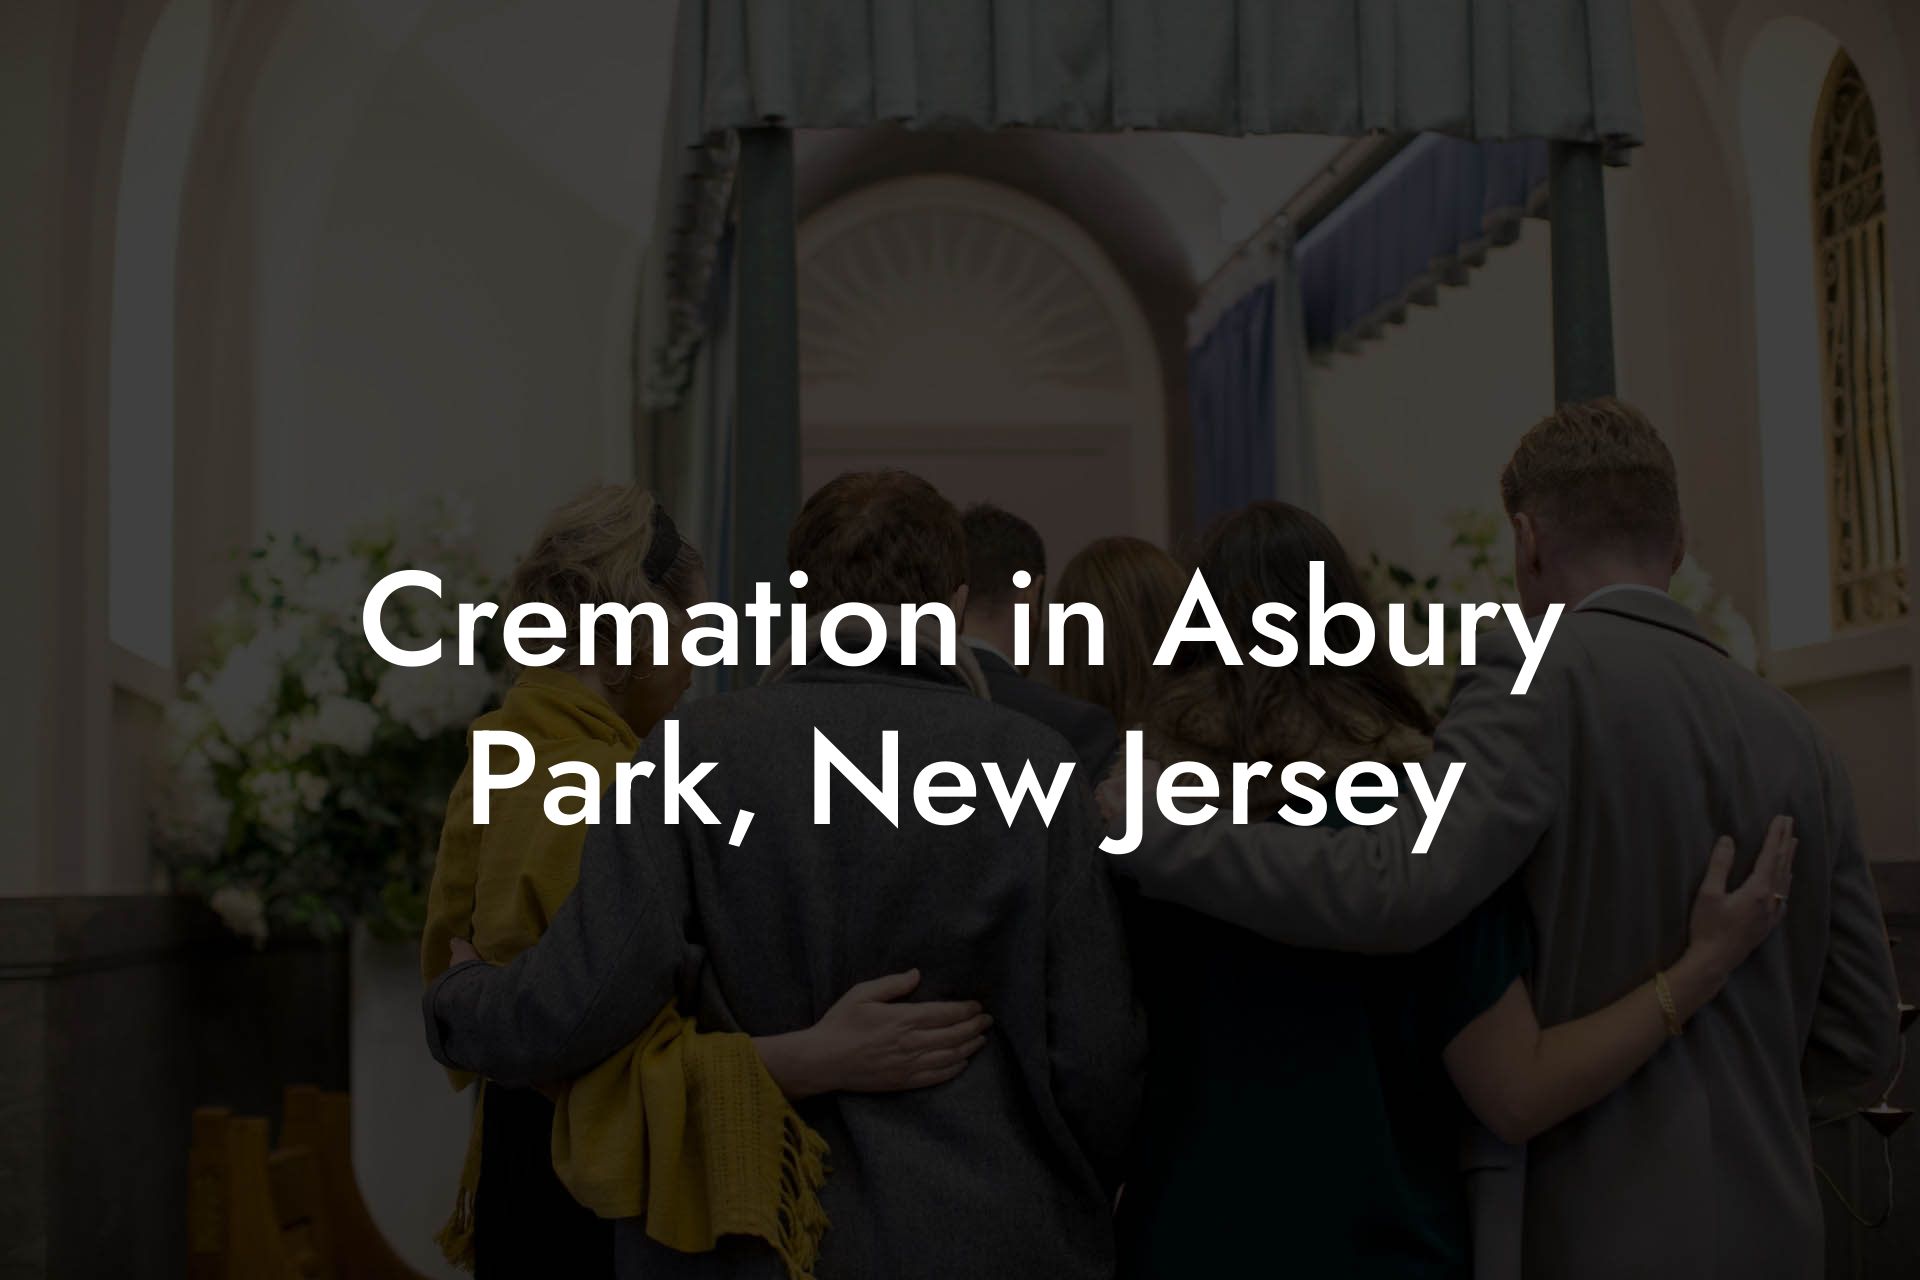 Cremation in Asbury Park, New Jersey